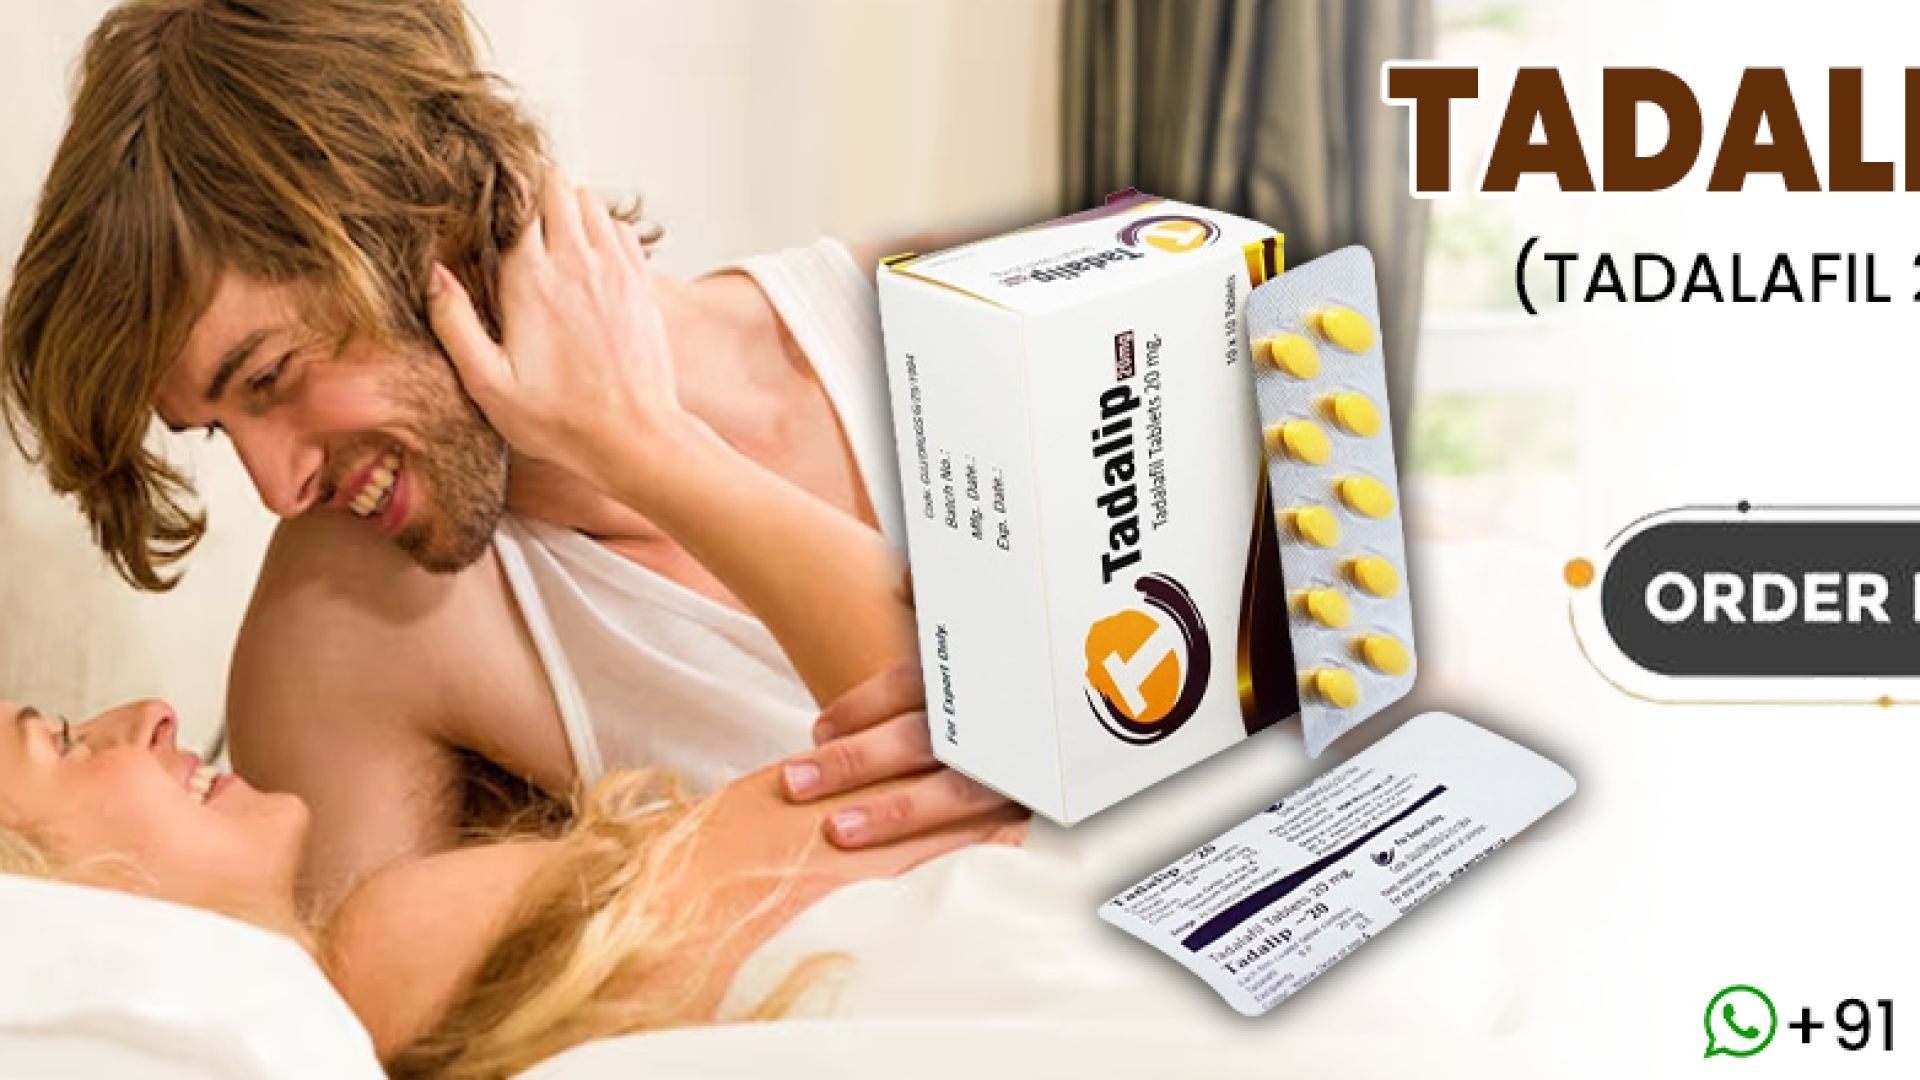 ⁣An Oral Medication to Manage Erection Failure With Tadalip 20mg